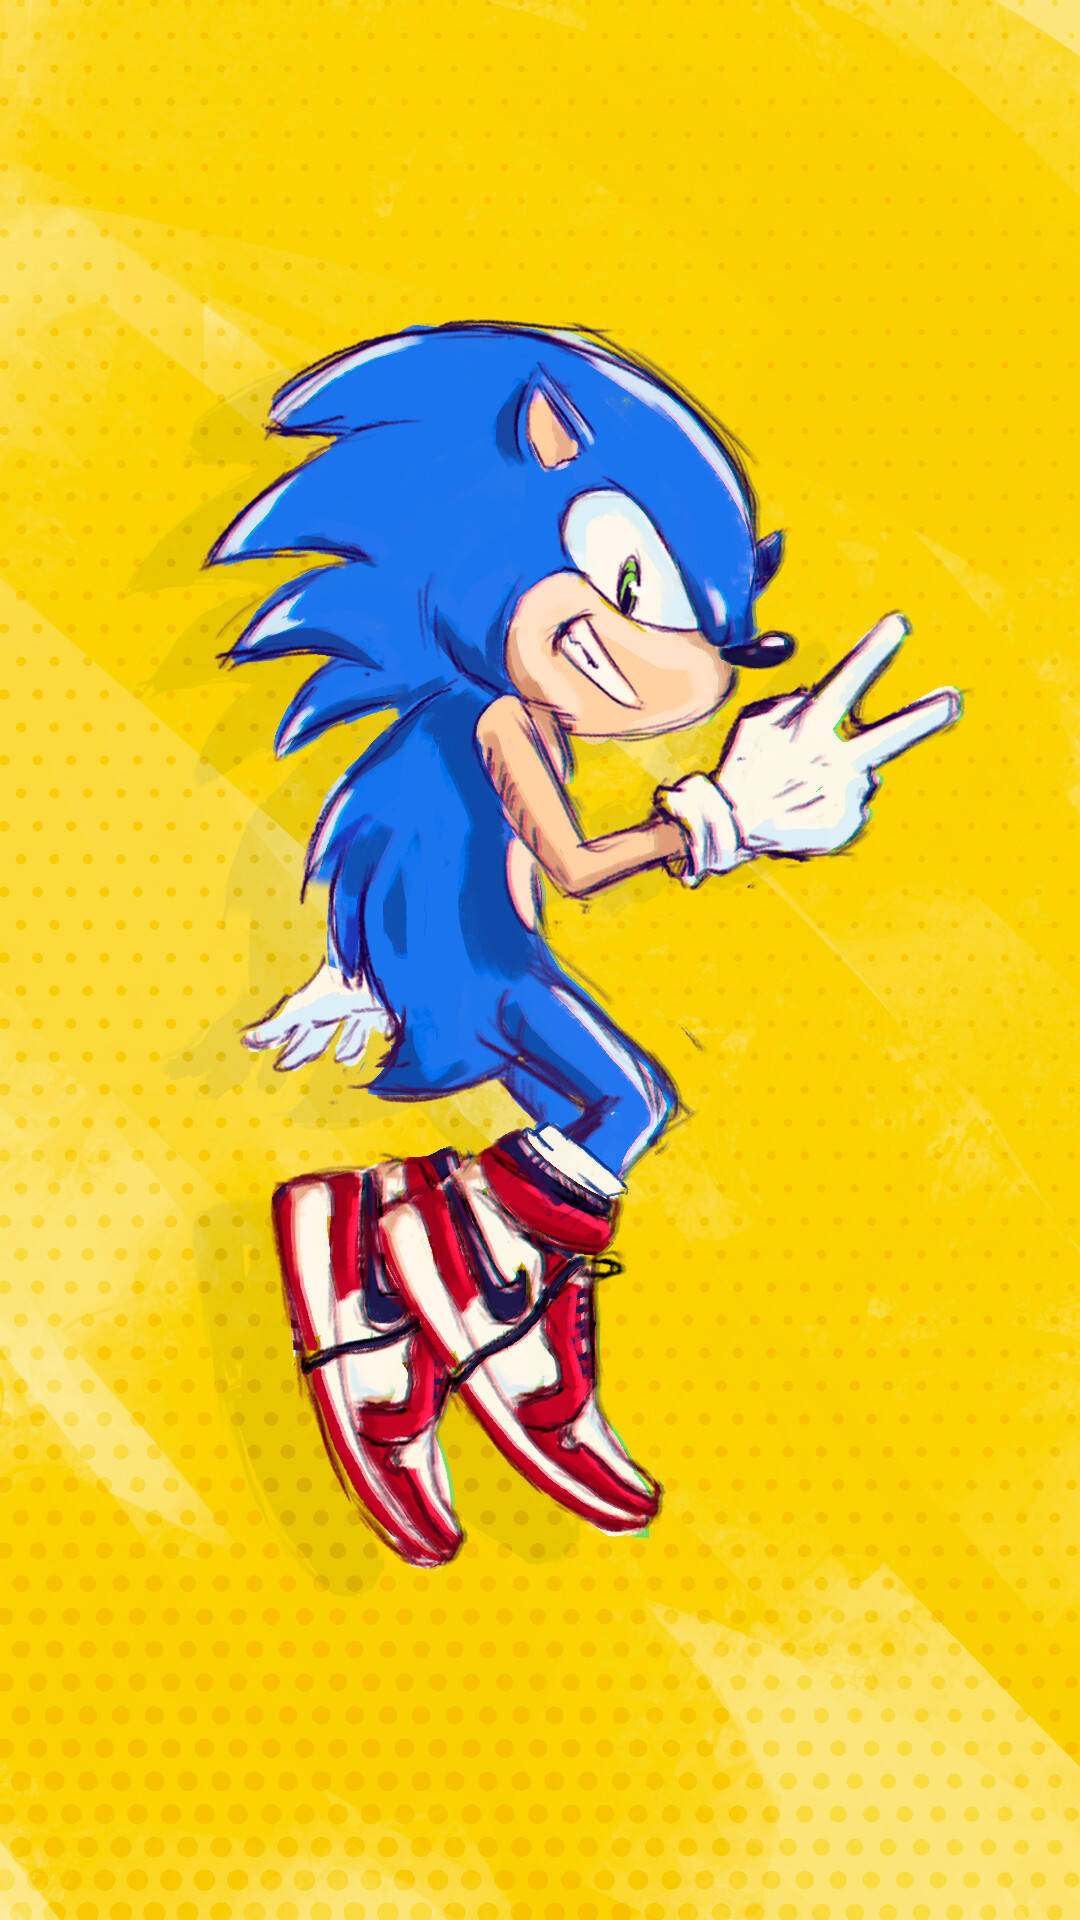 Sonic The Hedgehog On A Yellow Background Wallpaper